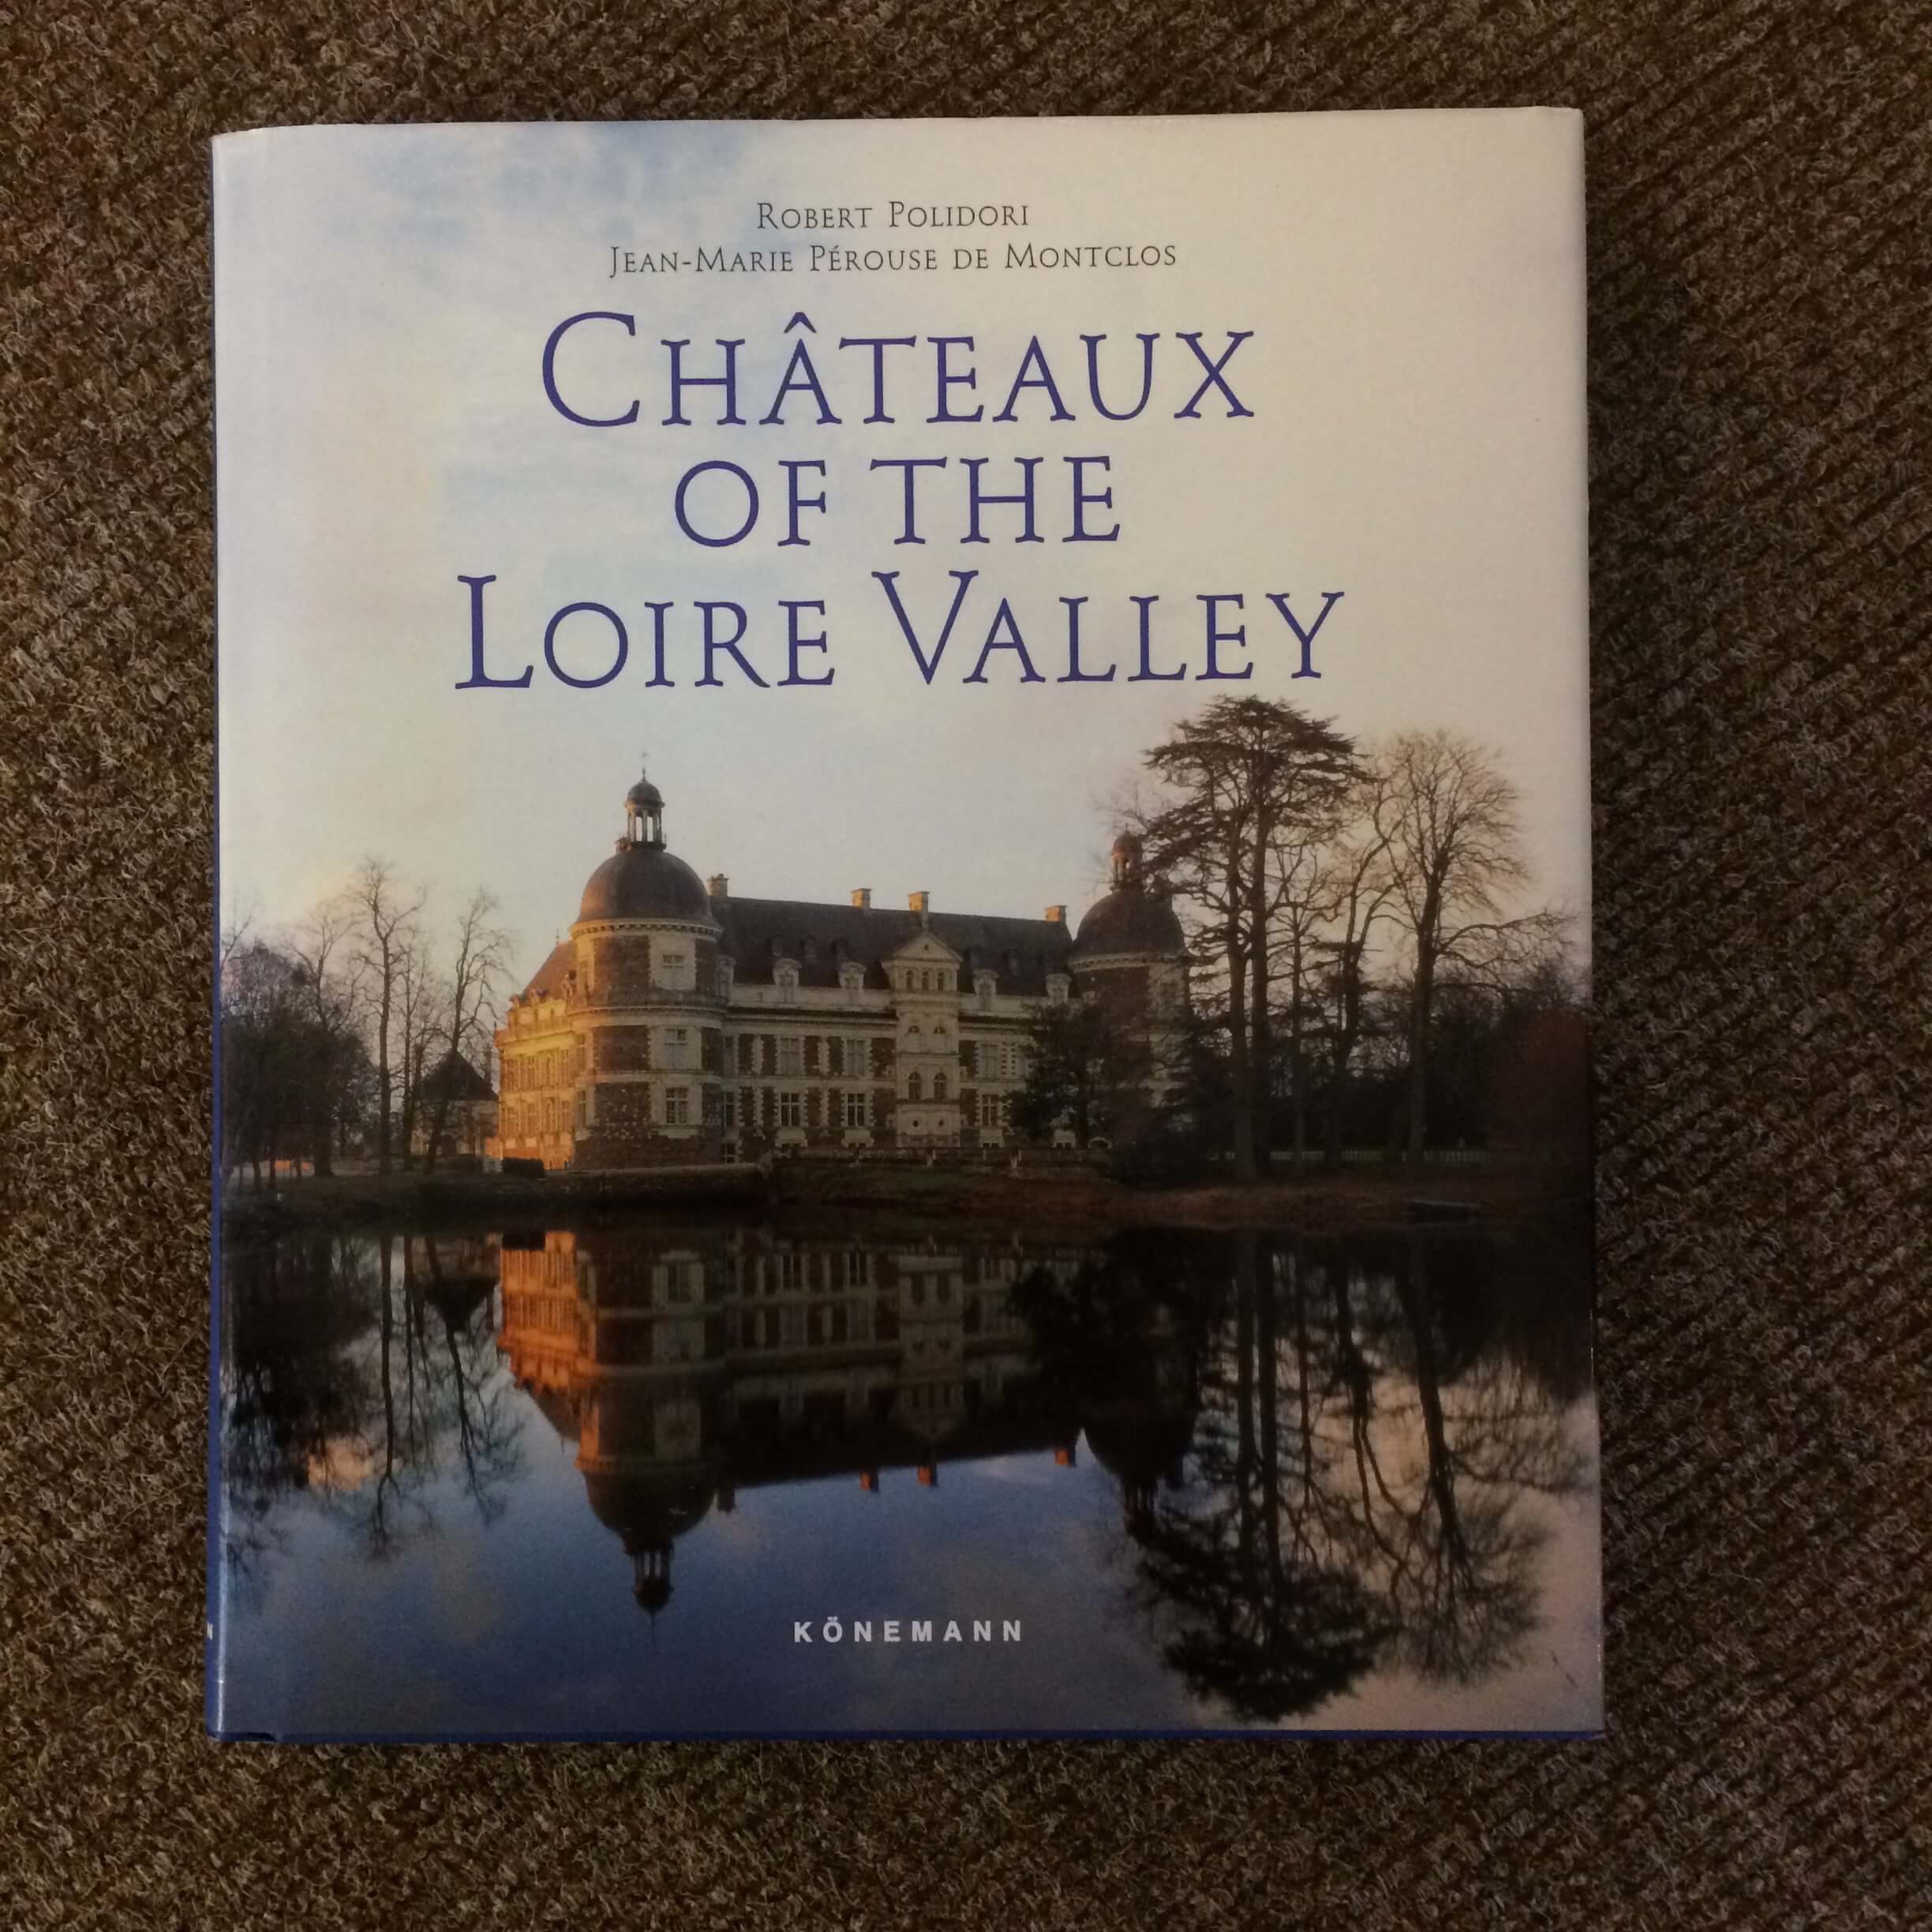 Chateaux-of-the-Loire-Valley